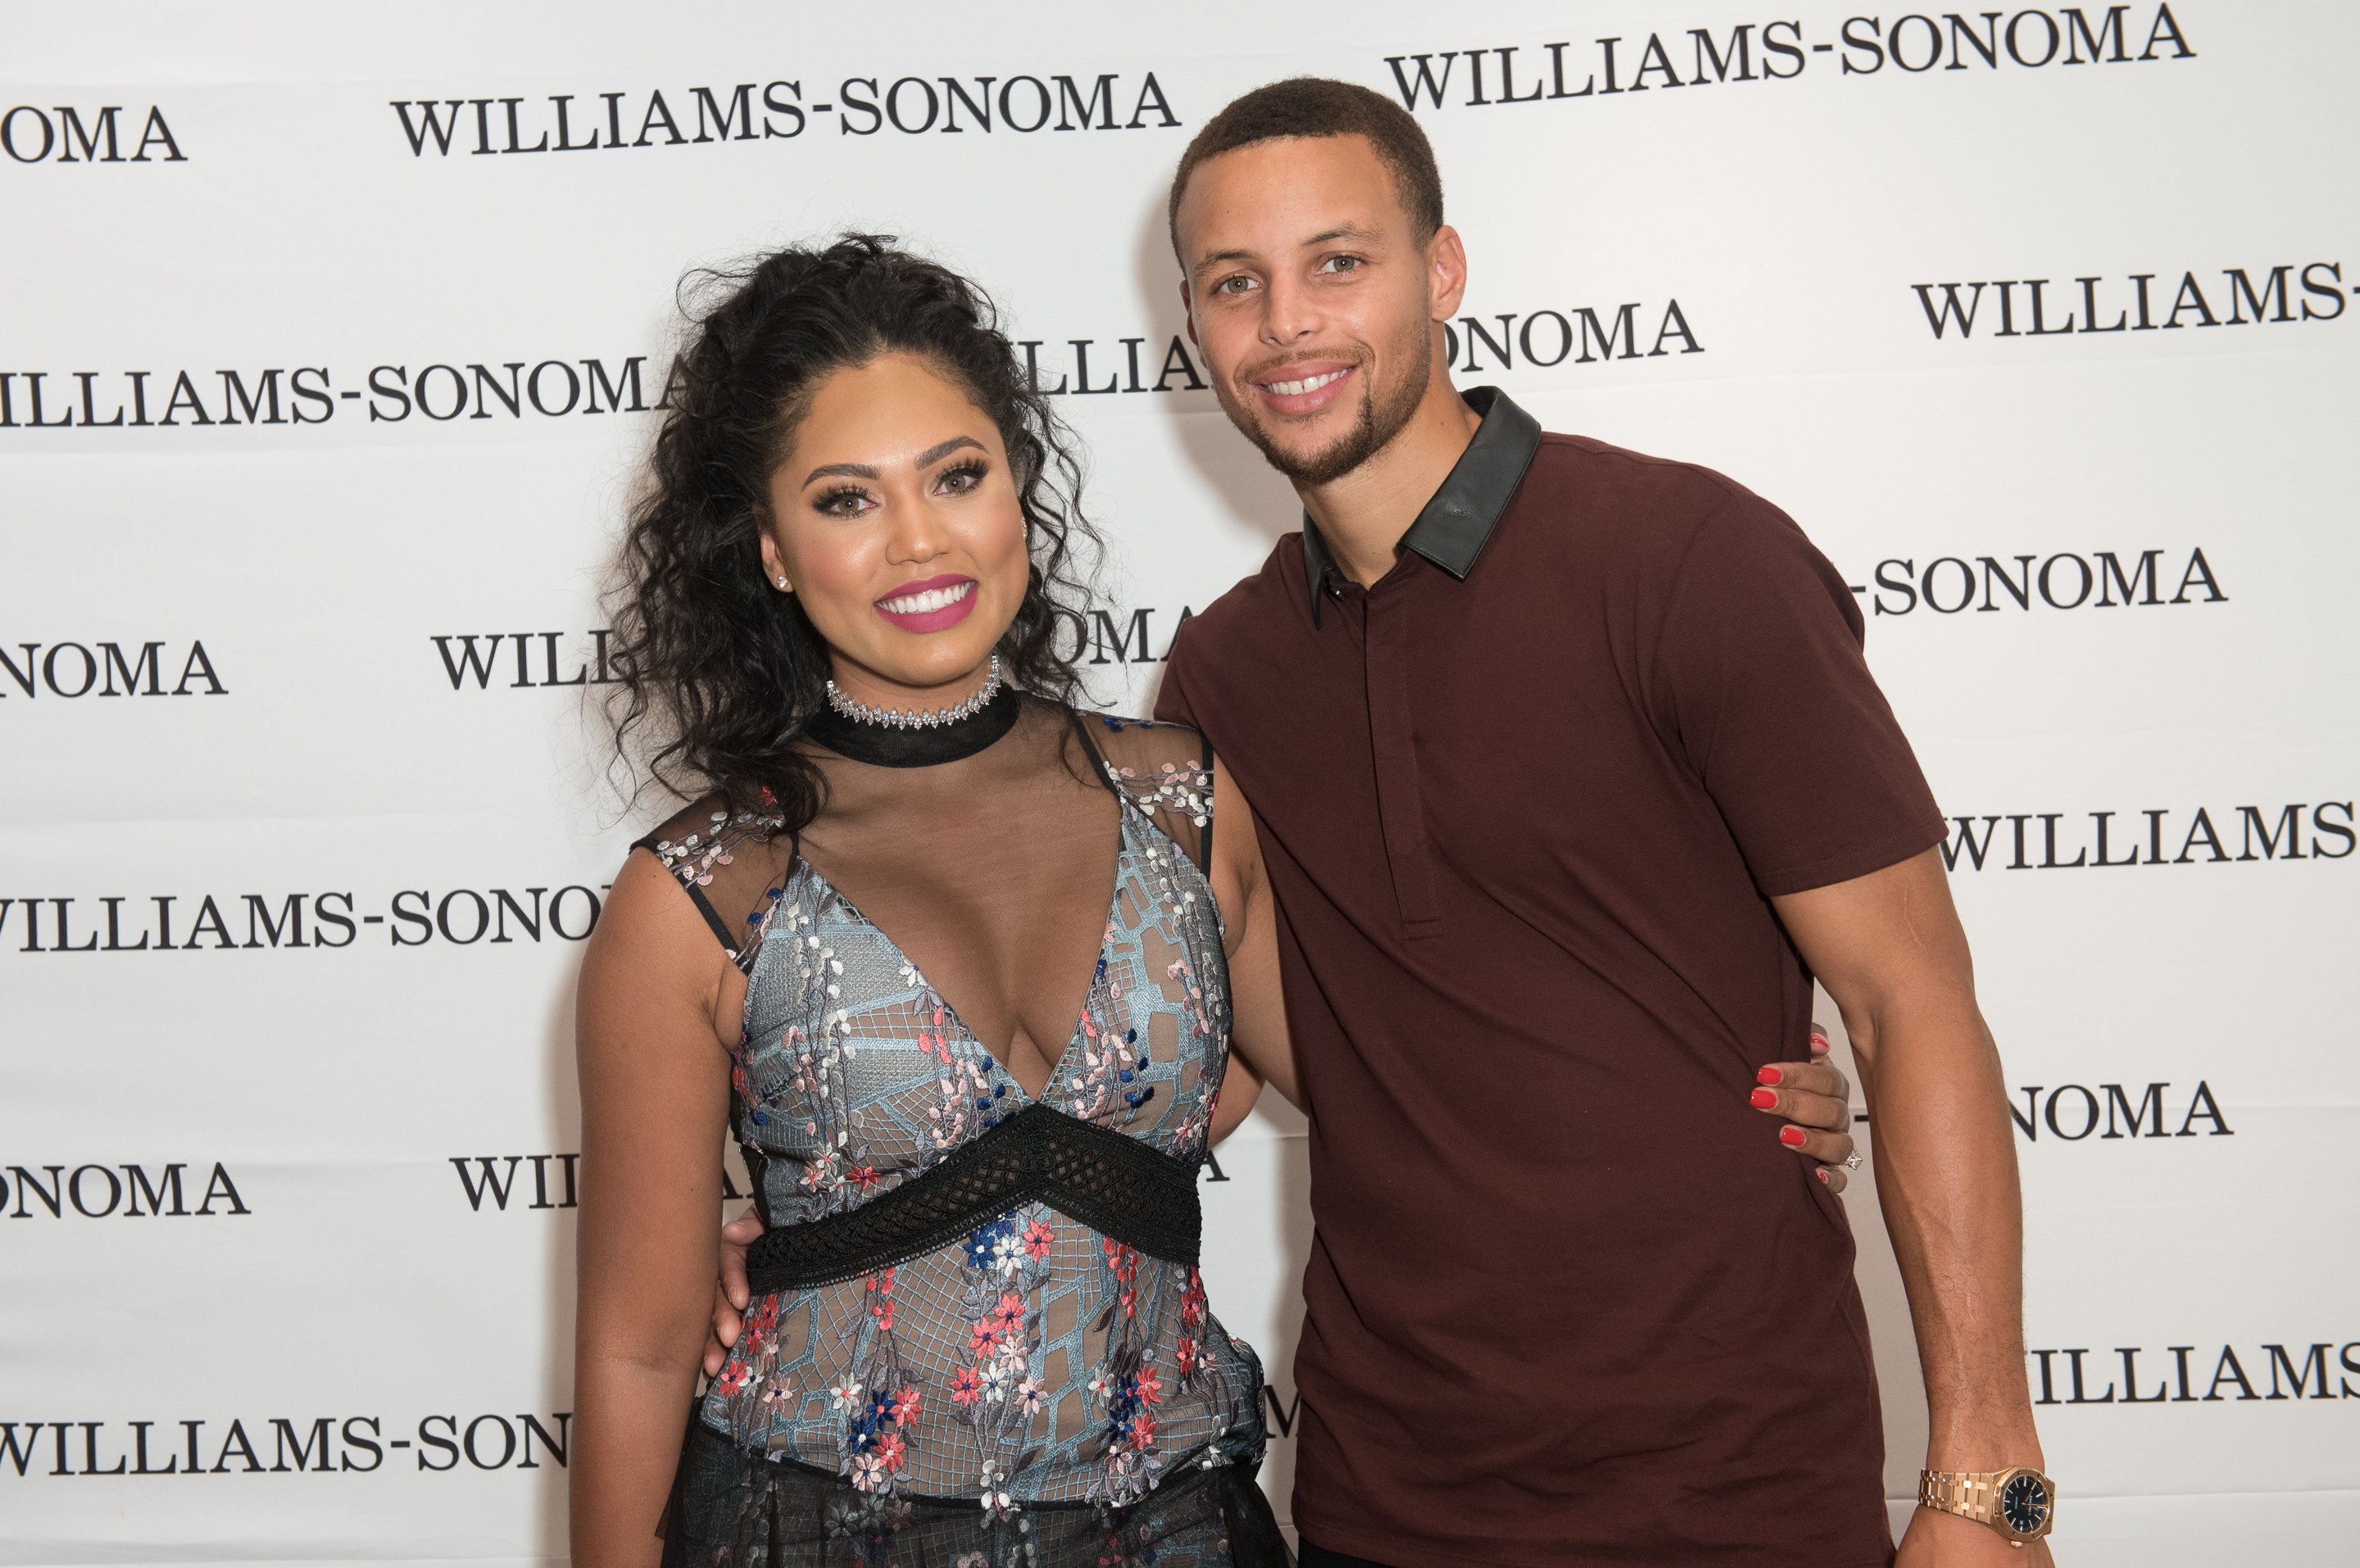 Ayesha Curry and Stephen Curry attend the Williams-Sonoma Ayesha Curry Book Signing at Williams-Sonoma Columbus Circle | Photo: Getty Images